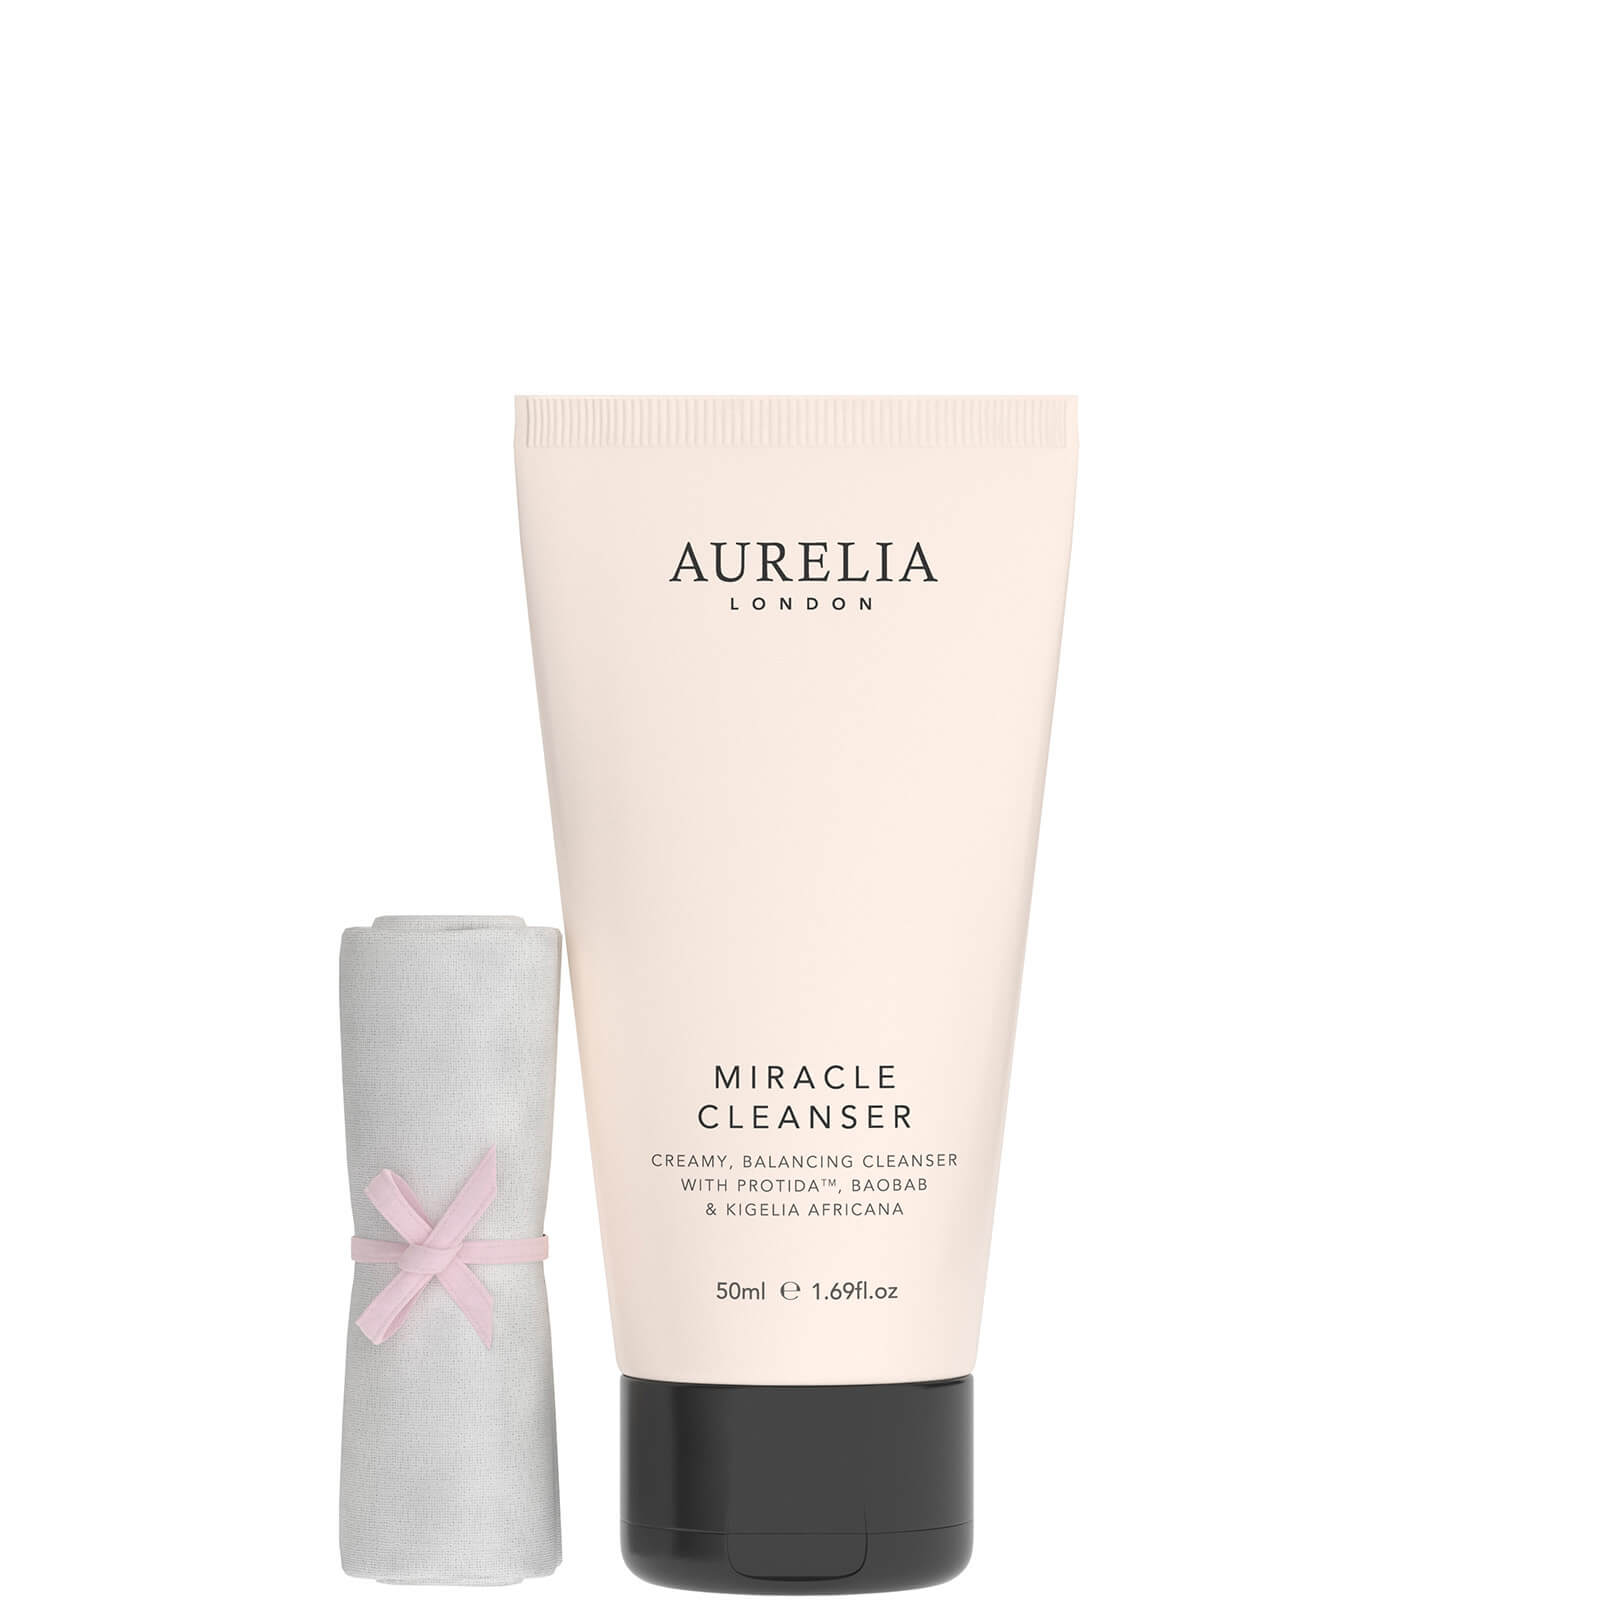 Photos - Facial / Body Cleansing Product Aurelia London Miracle Cleanser 50ml AS001-50